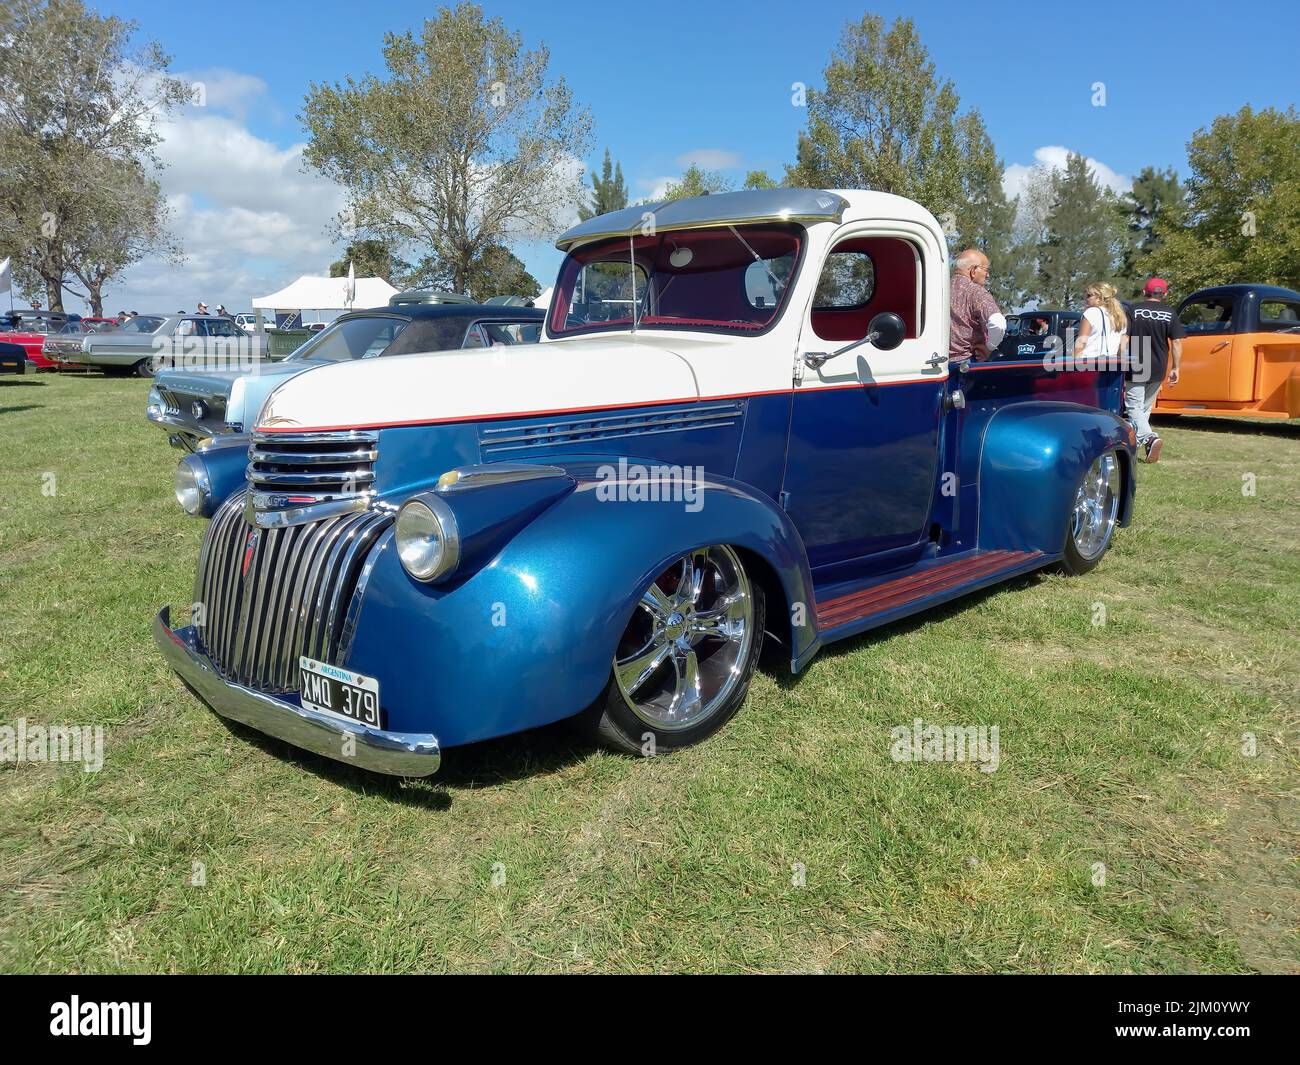 Chascomus, Argentina - Apr 09, 2022: Old blue utility pickup truck Chevrolet Chevy 3100 1940s by General Motors in the countryside. Nature grass trees Stock Photo